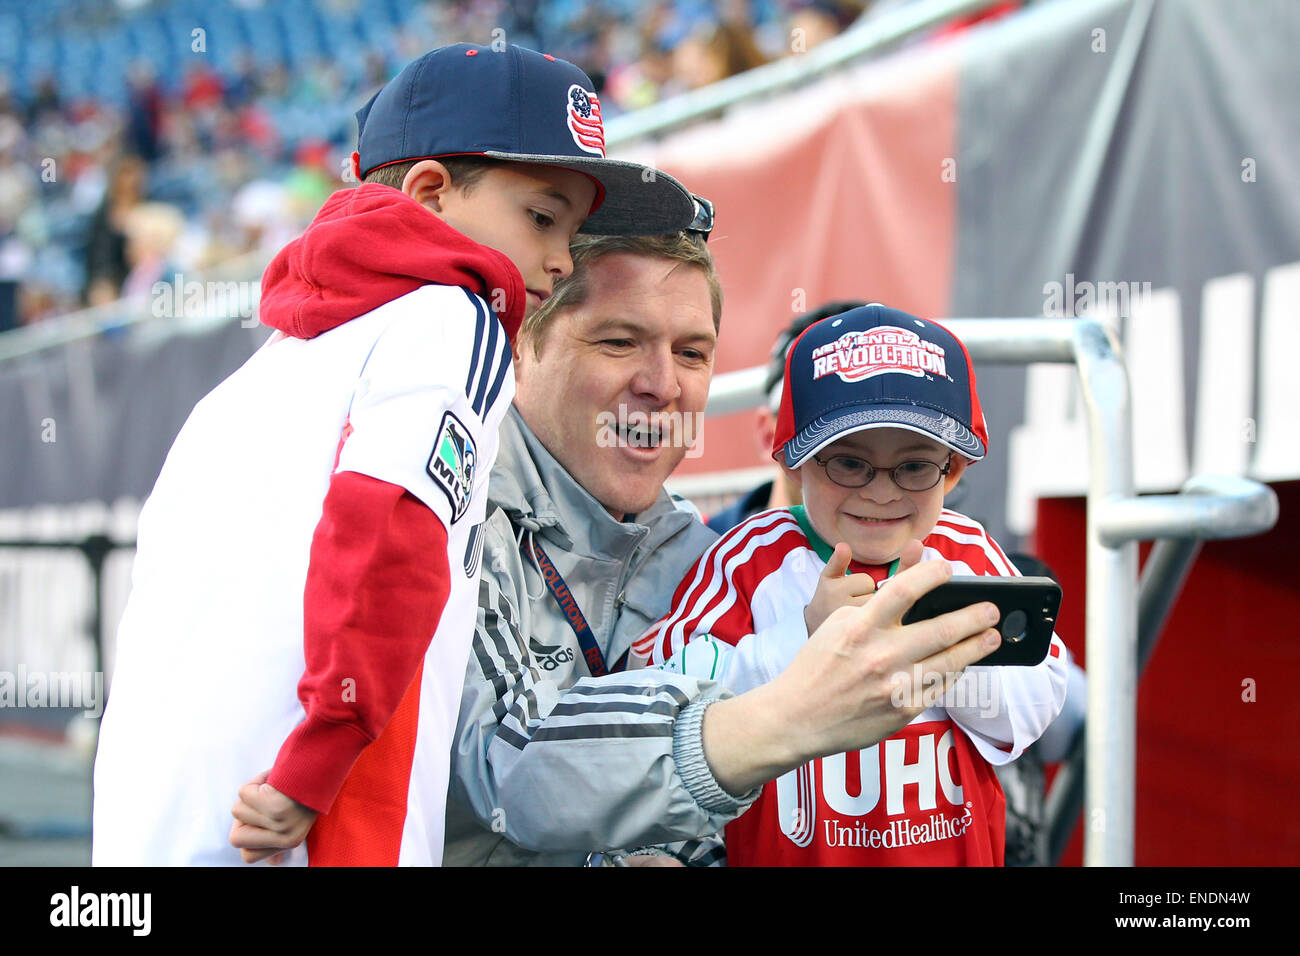 Foxborough, MA, USA. 2nd May, 2015. New England Revolution Director of Marketing Cathal Conlon (center) takes a selfie with Leukemia survivor Liam Fitzgerald (right) prior to the MLS game between the New England Revolution and New York Red Bulls at Gillette Stadium. New England defeated New York 2-1. Anthony Nesmith/CSM Stock Photo